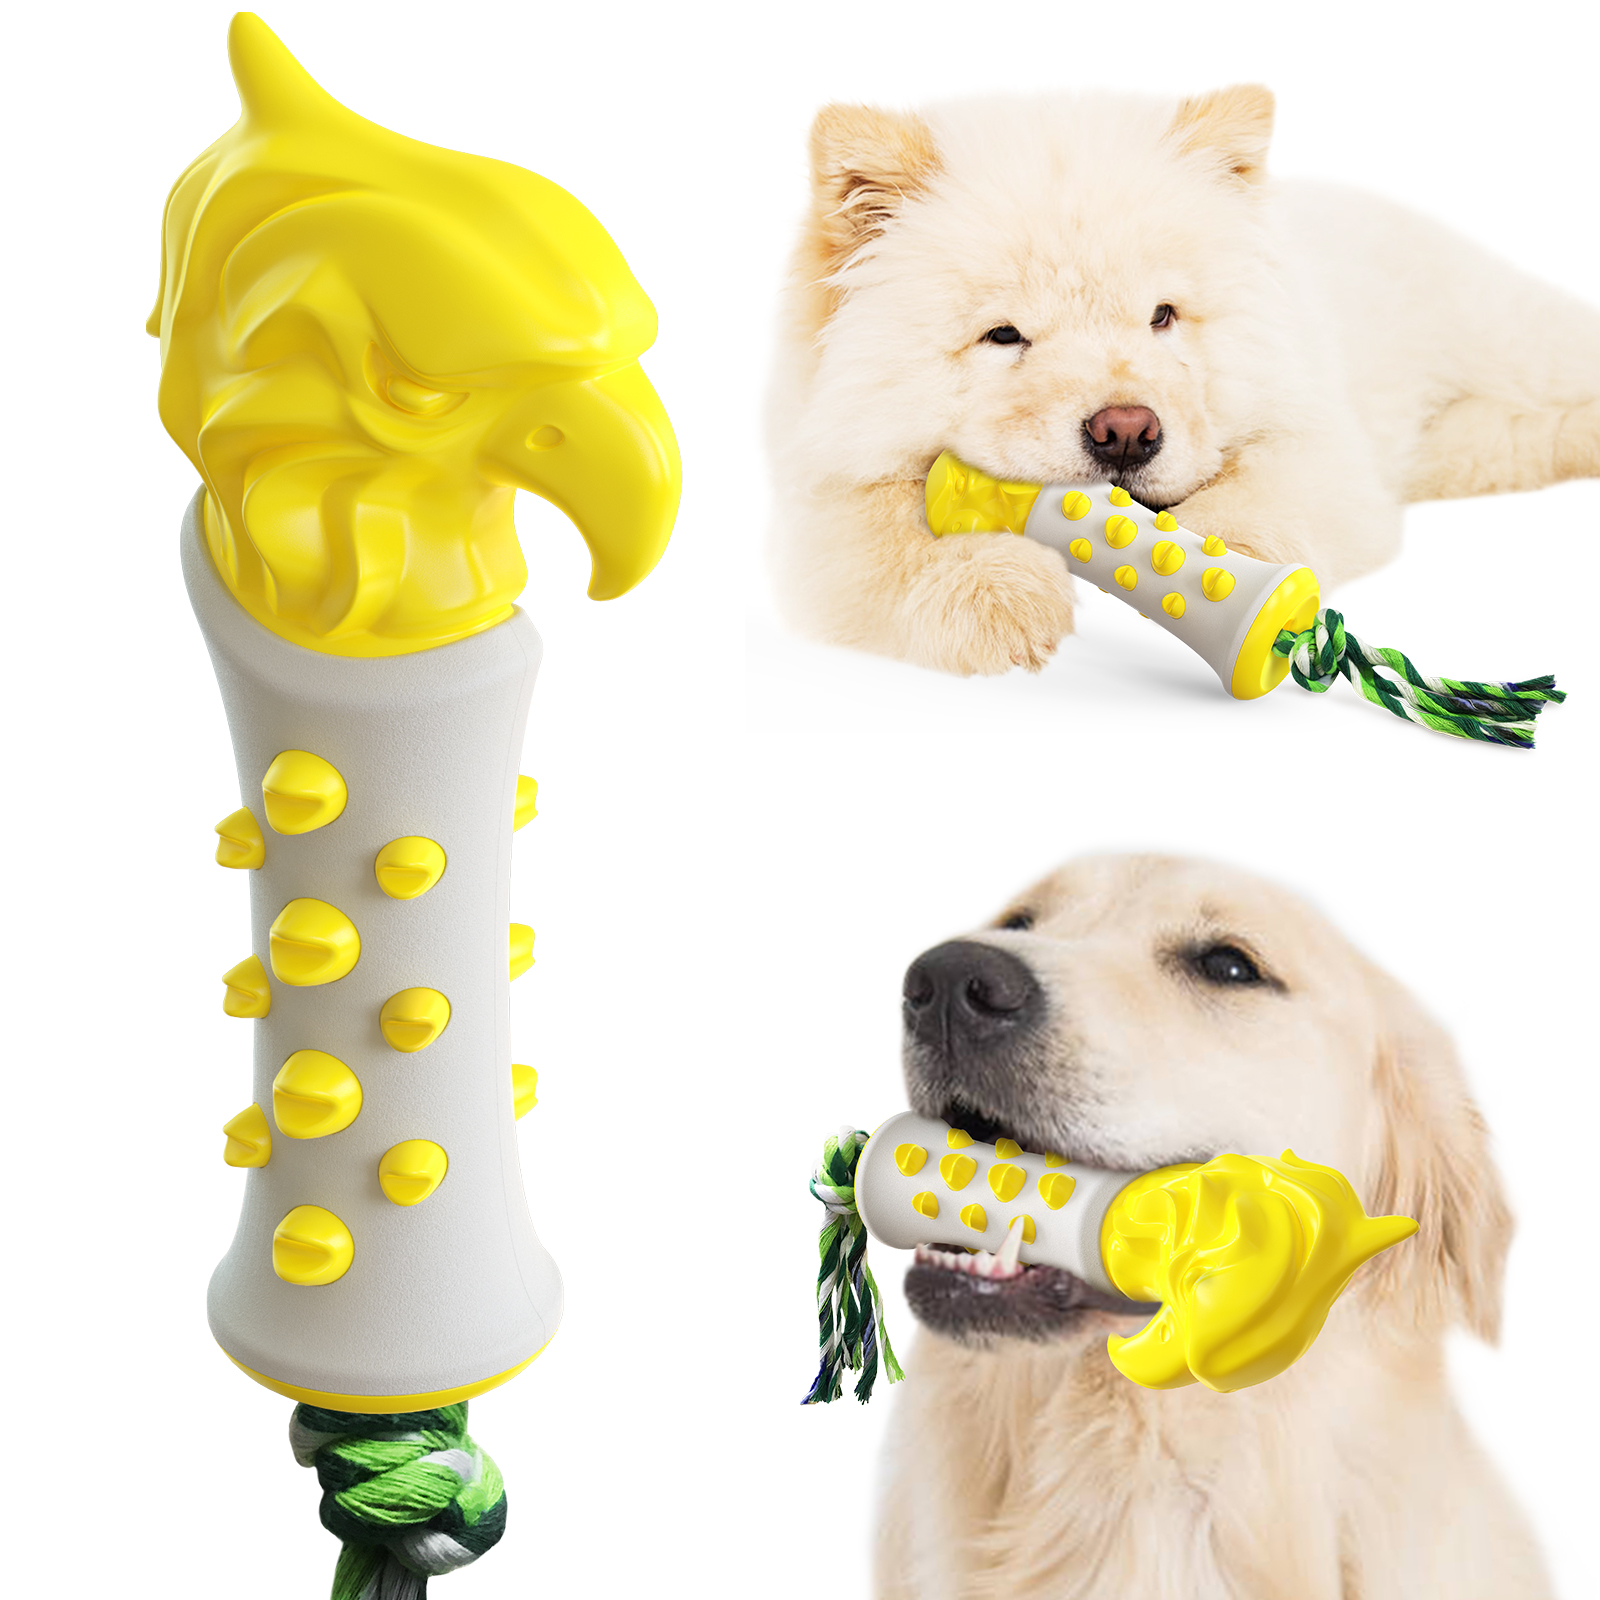 Pet Supplies Factory New Explosive Amazon Bite Resistant Tooth Cleaning Dog Toothbrush Molar Stick Scepter Dog Toys